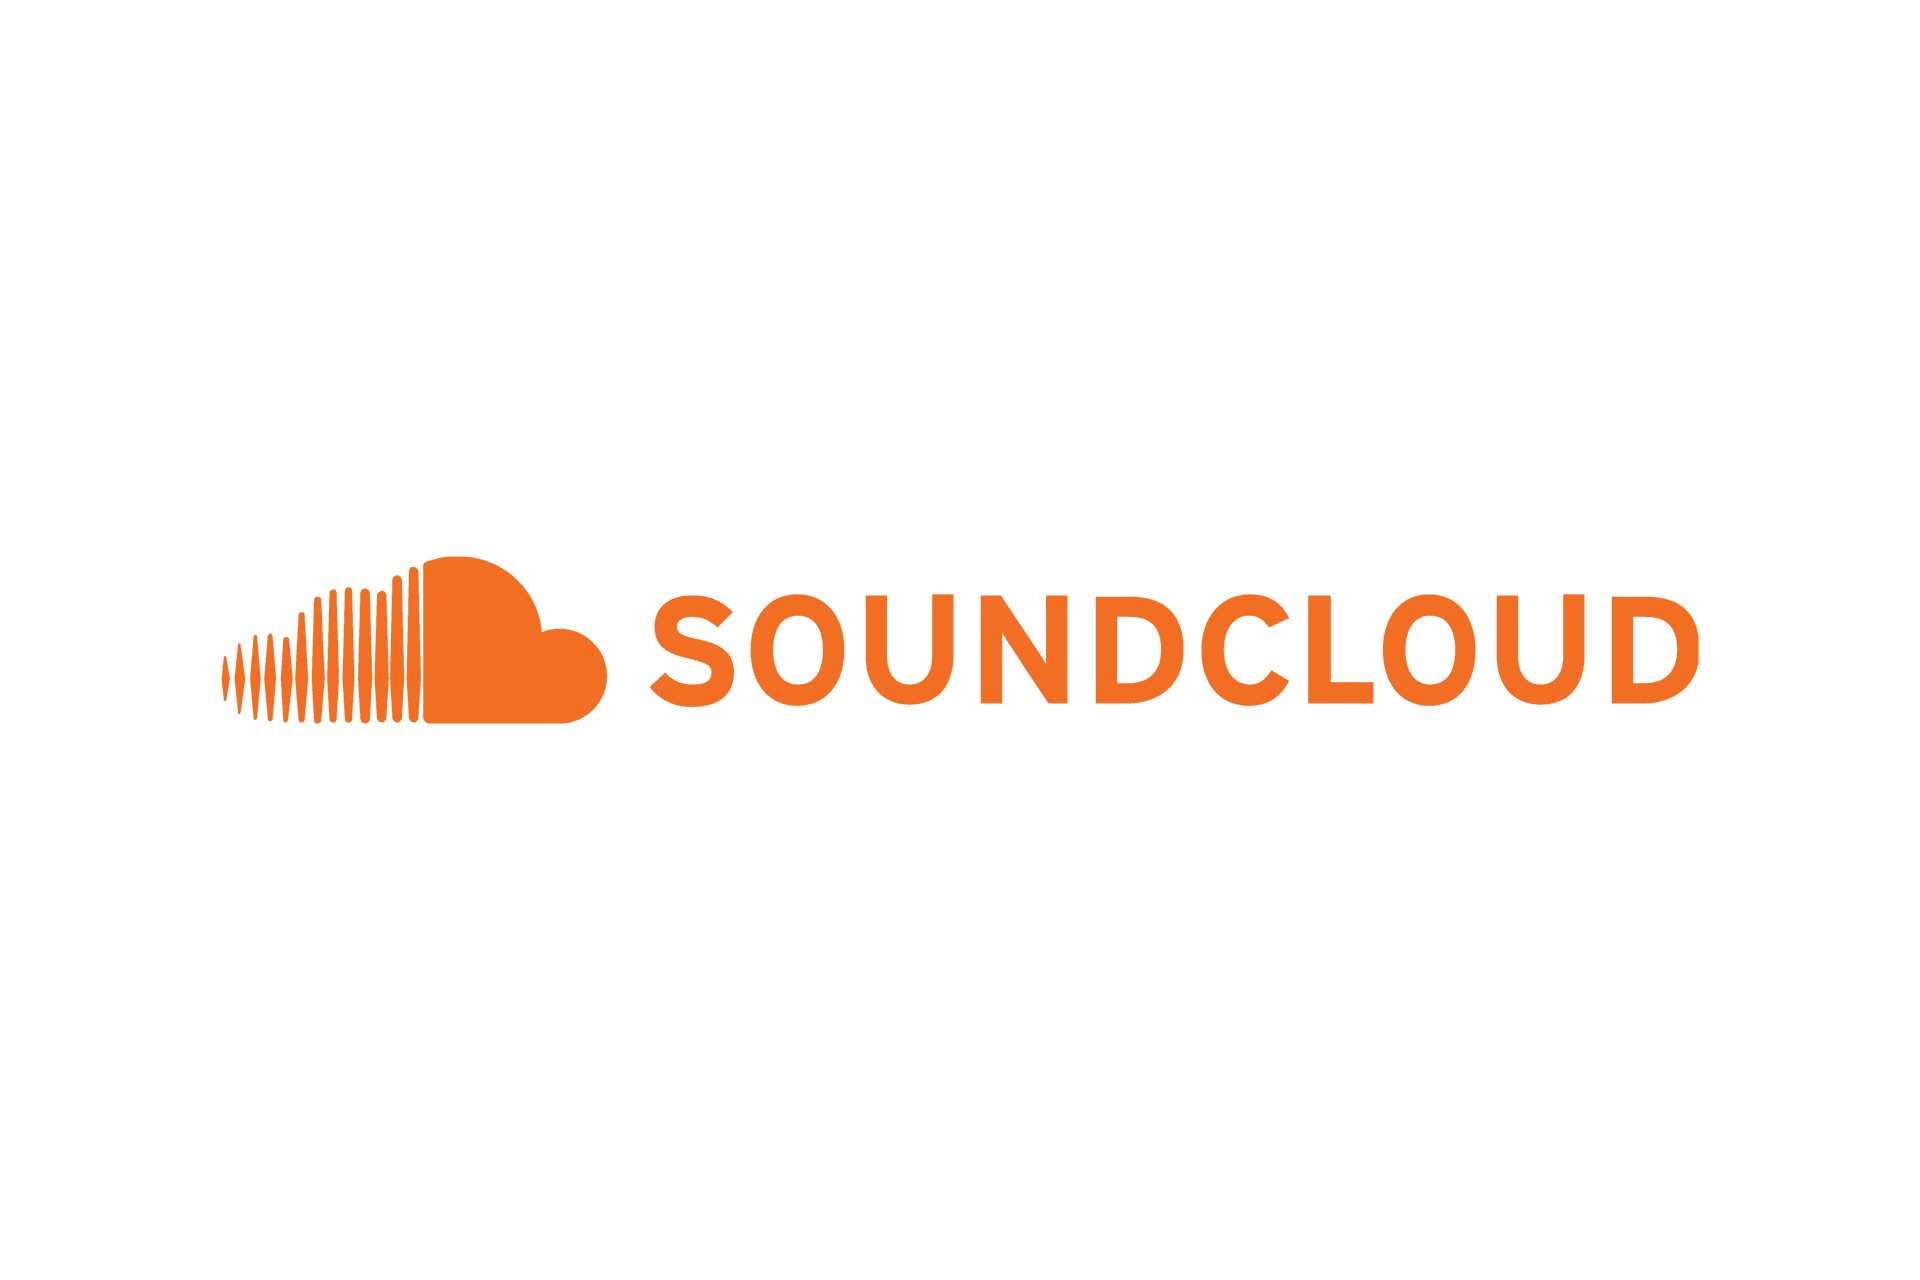 Unlock infinite music with Soundcloud and get inspired